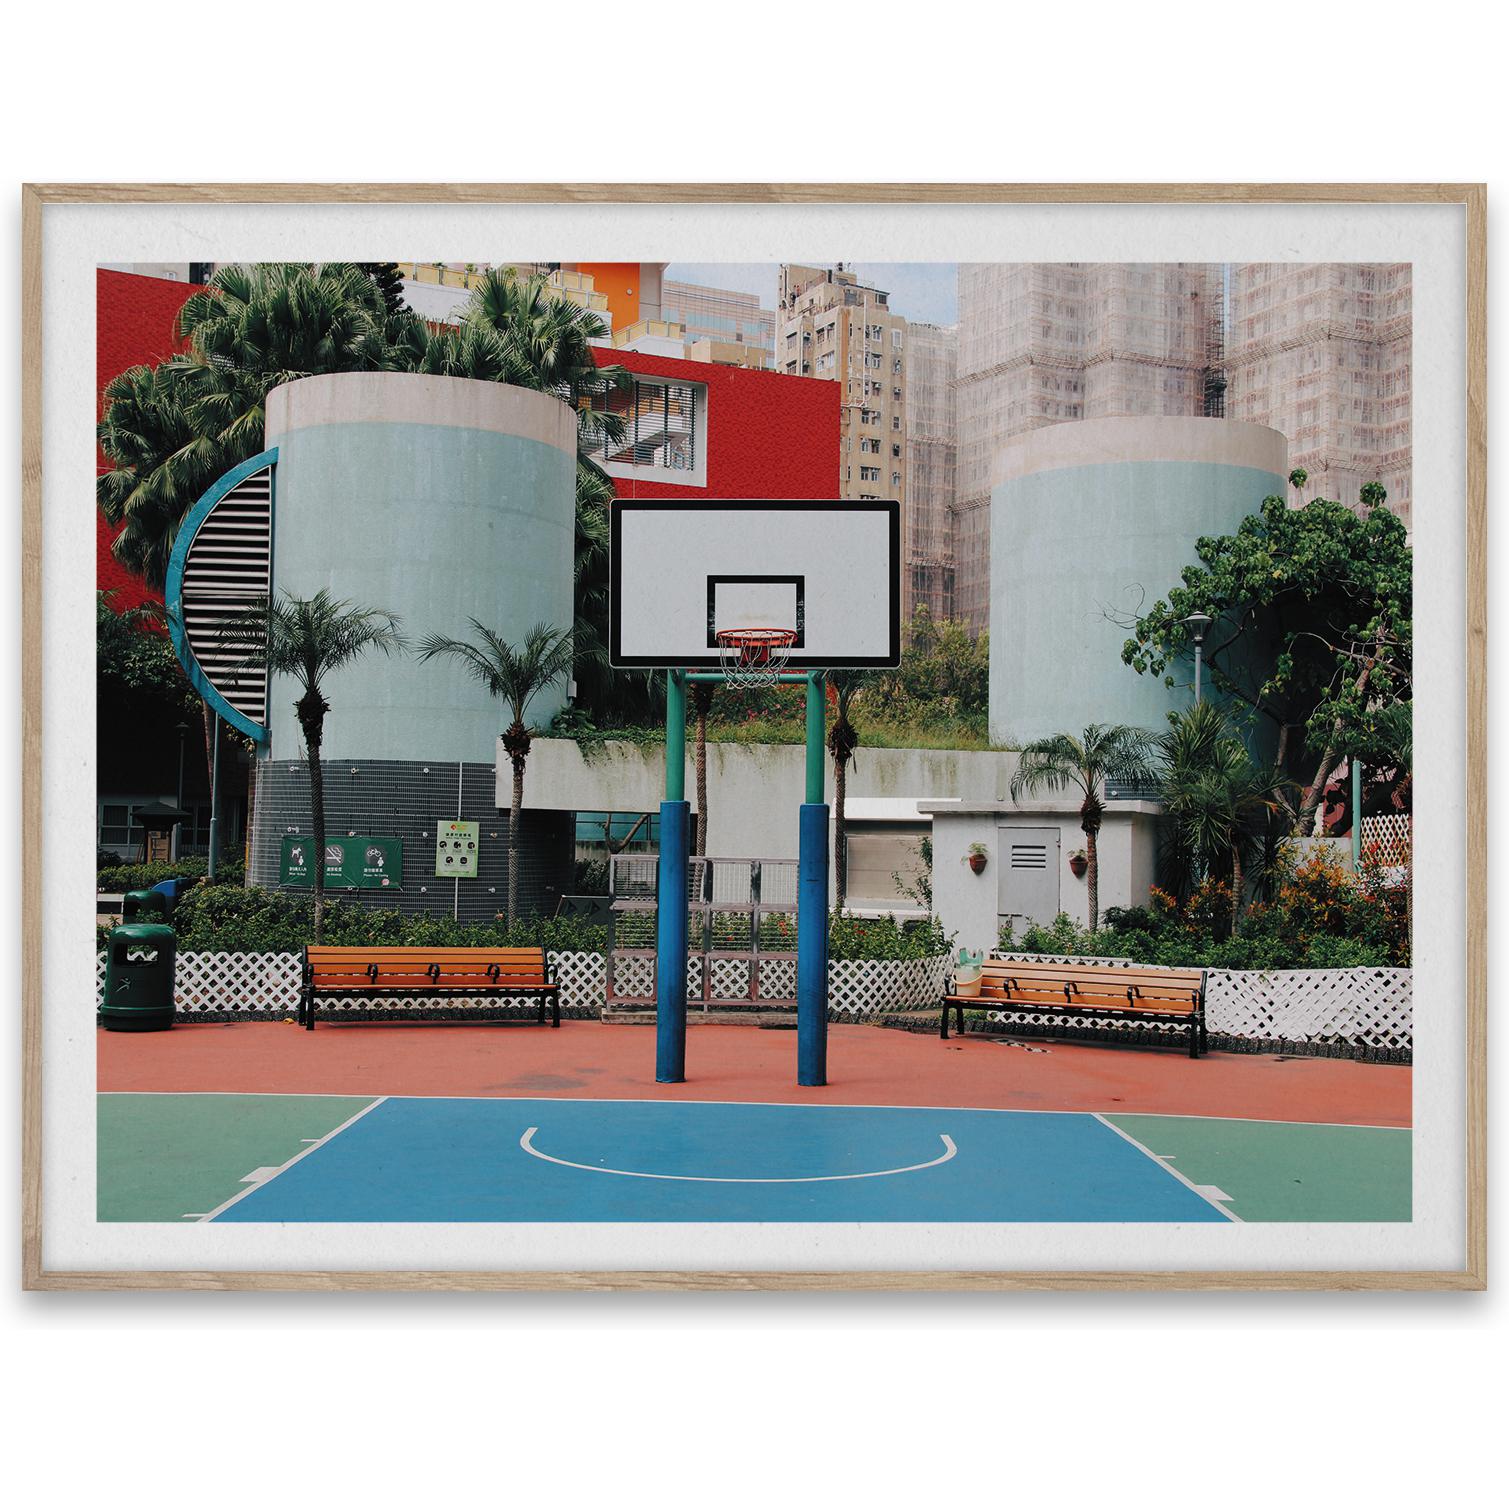 Paper Collective Cities Of Basketball 04, Hong Kong Poster, 30x40 Cm